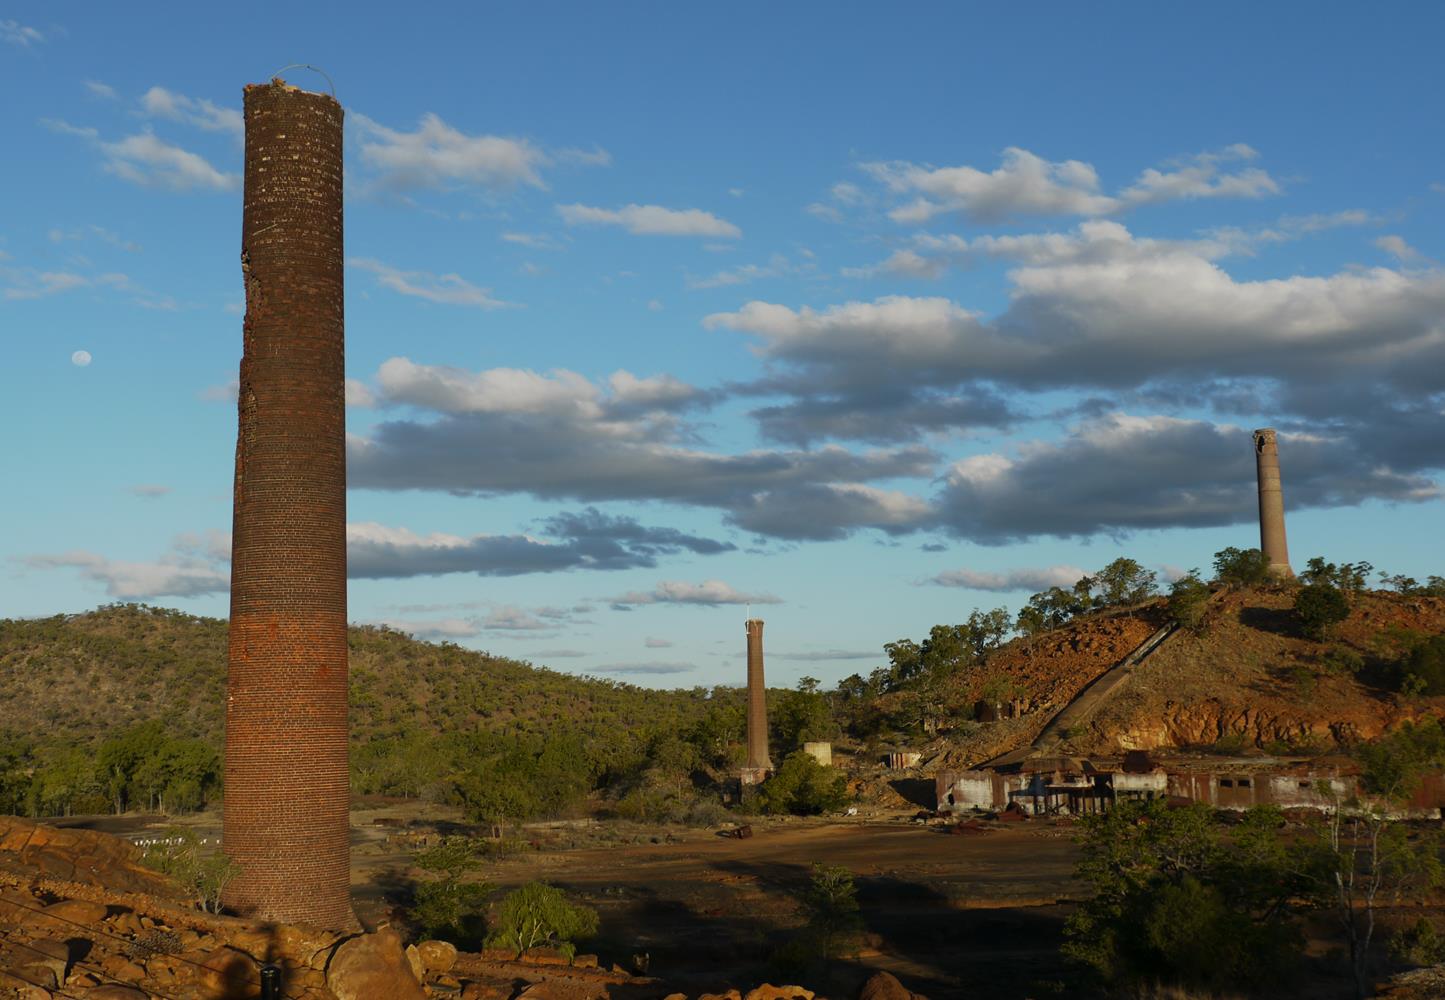 Remains of the Chillagoe smelters, which operated from 1901 to 1943